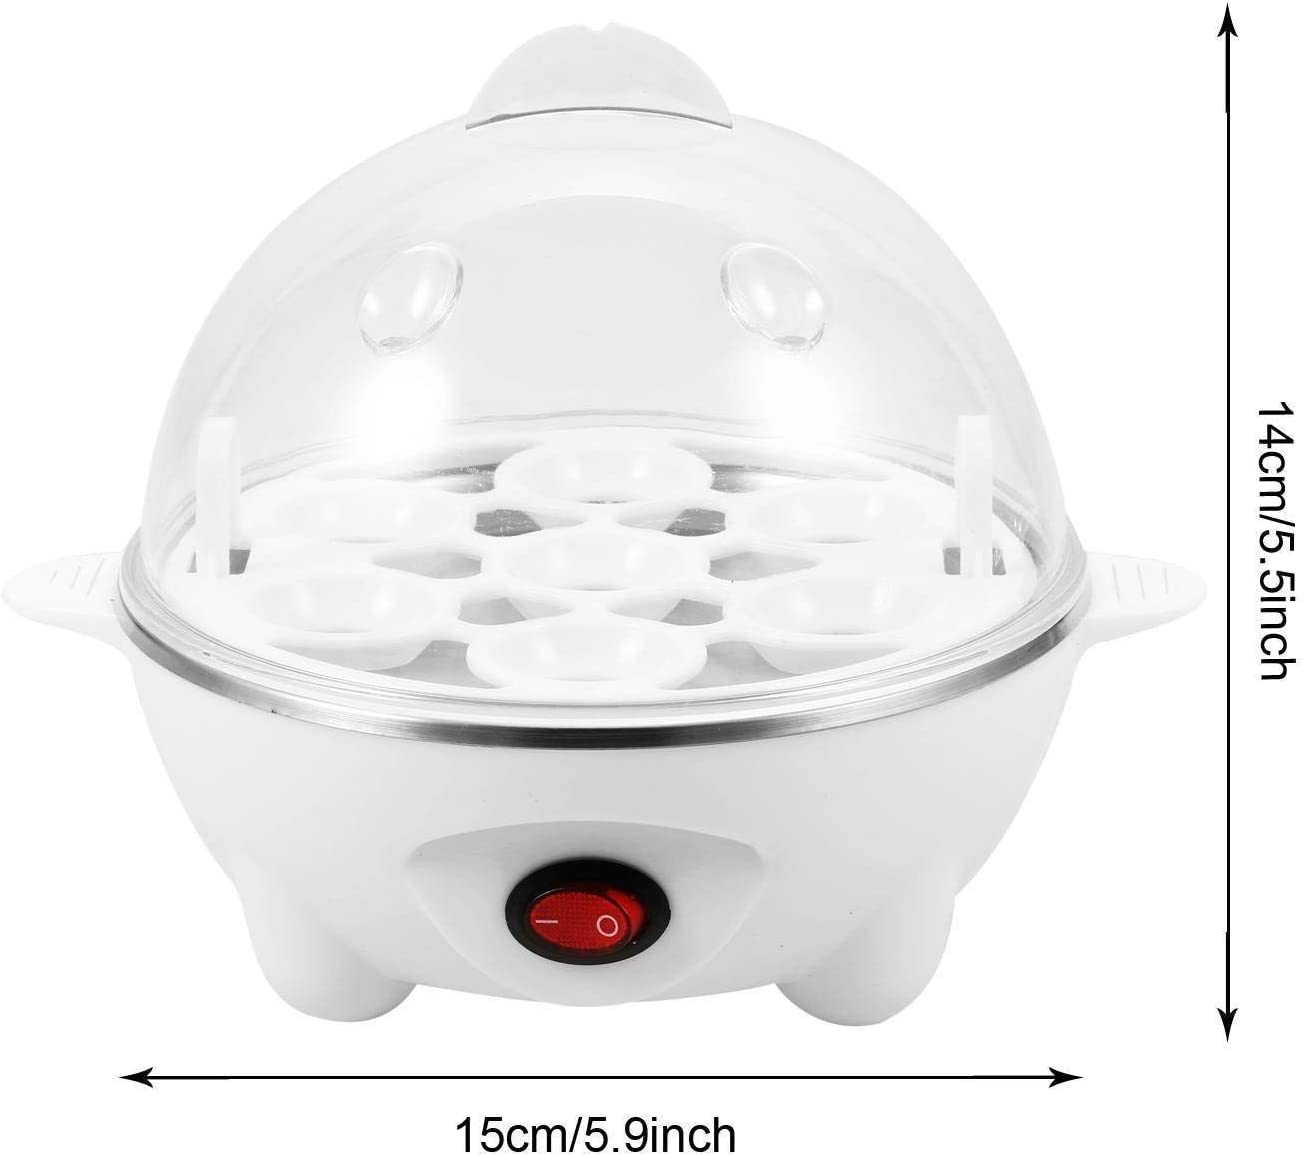 J-JATI Egg Boiler with measuring cup, 7 cup capacity